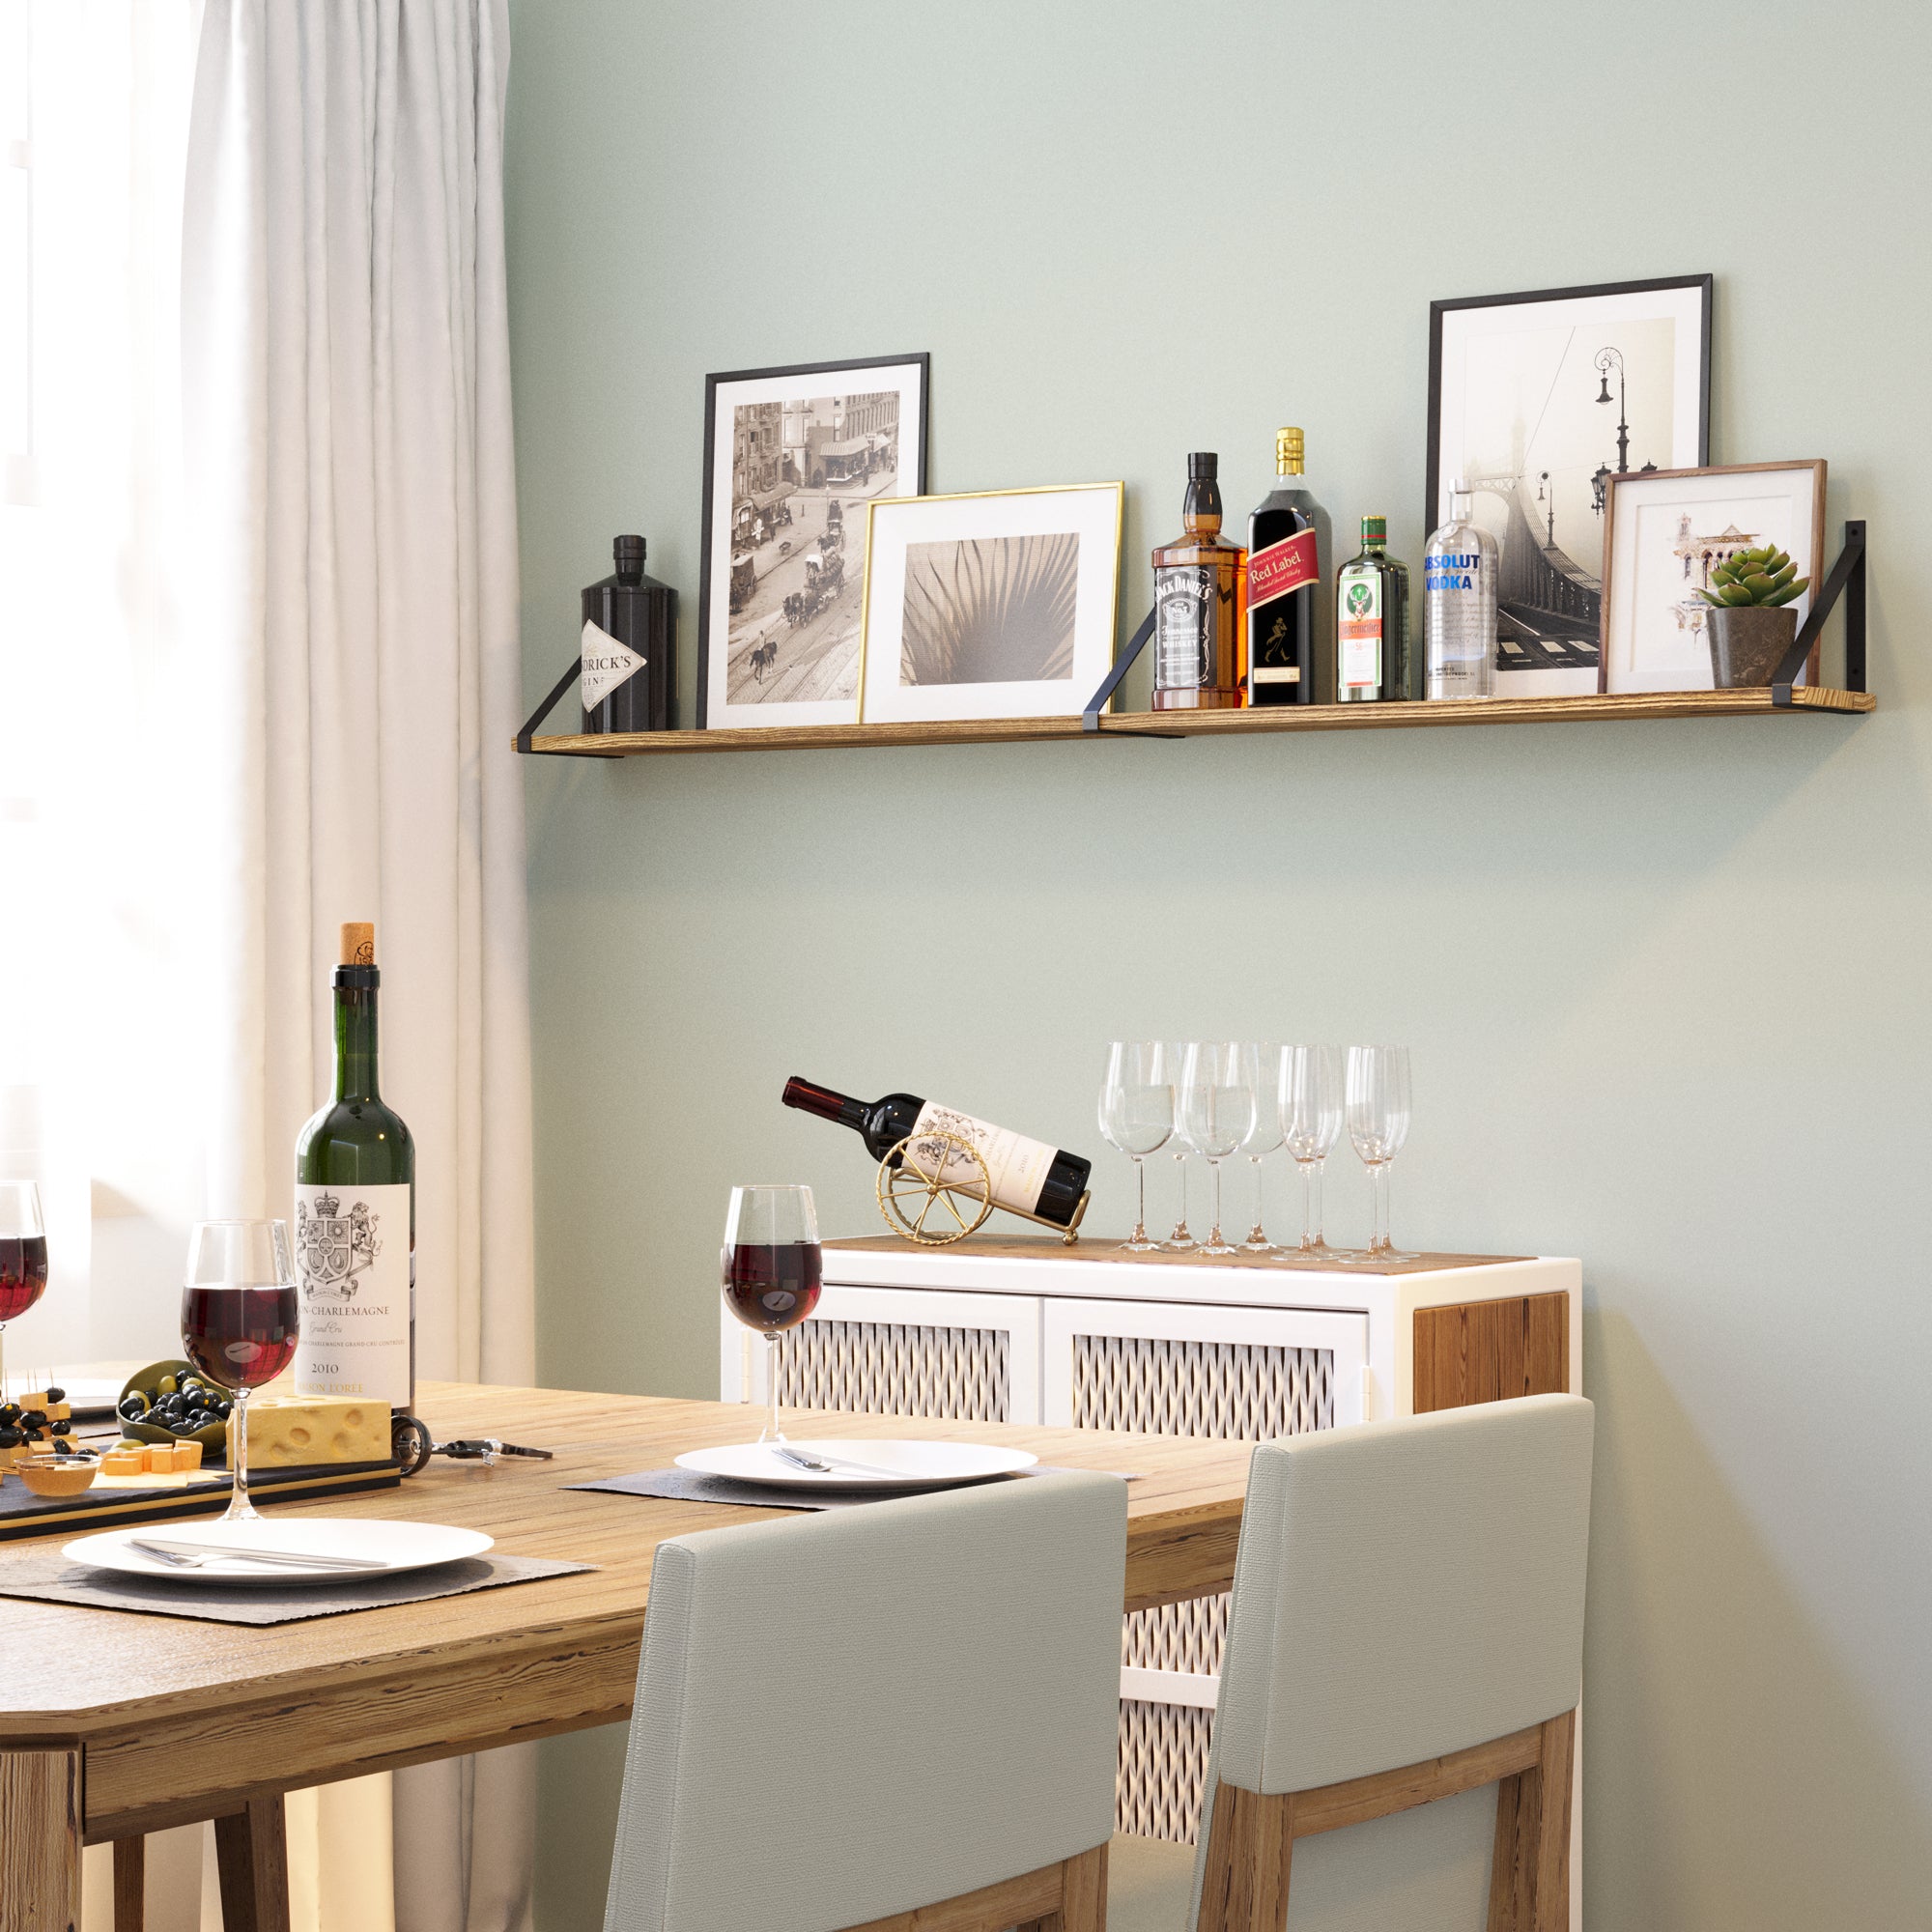 A cozy dining space with a wooden table, chairs, a wall storage shelf with liquor and decor, and a sideboard with wine glasses.